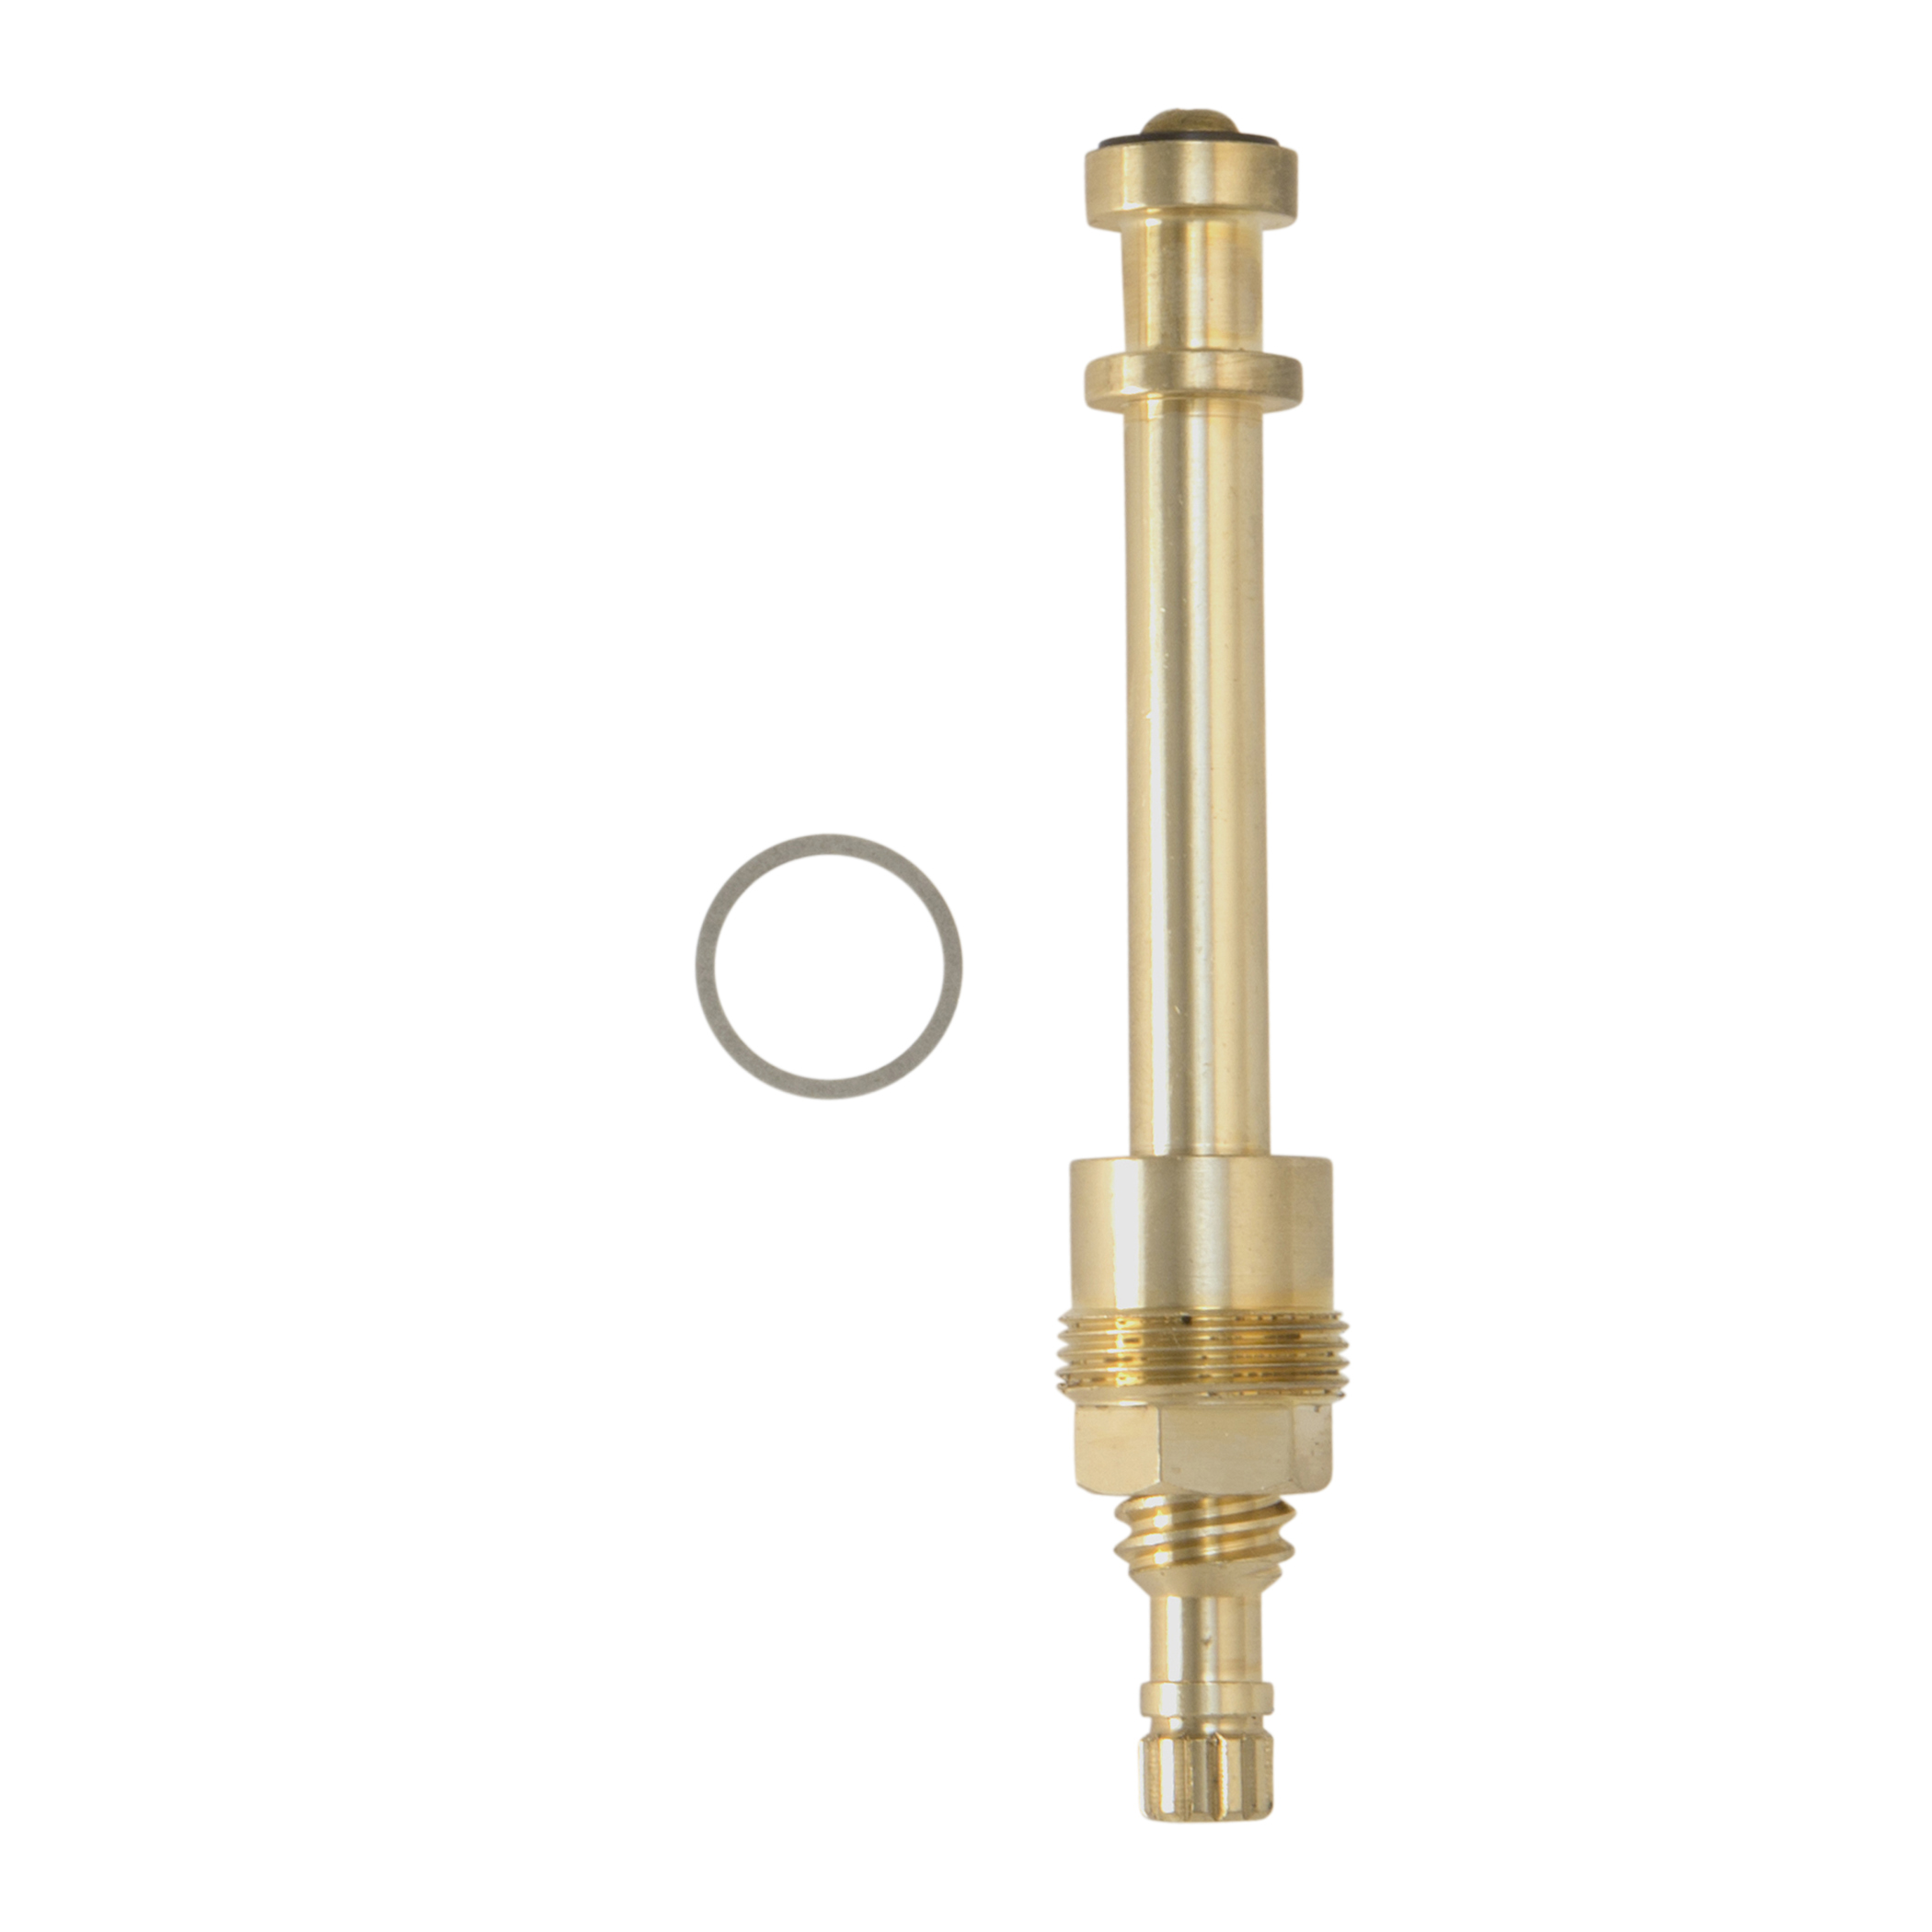 10H-1H/C Hot/Cold Stem for Price Pfister Faucets - Danco